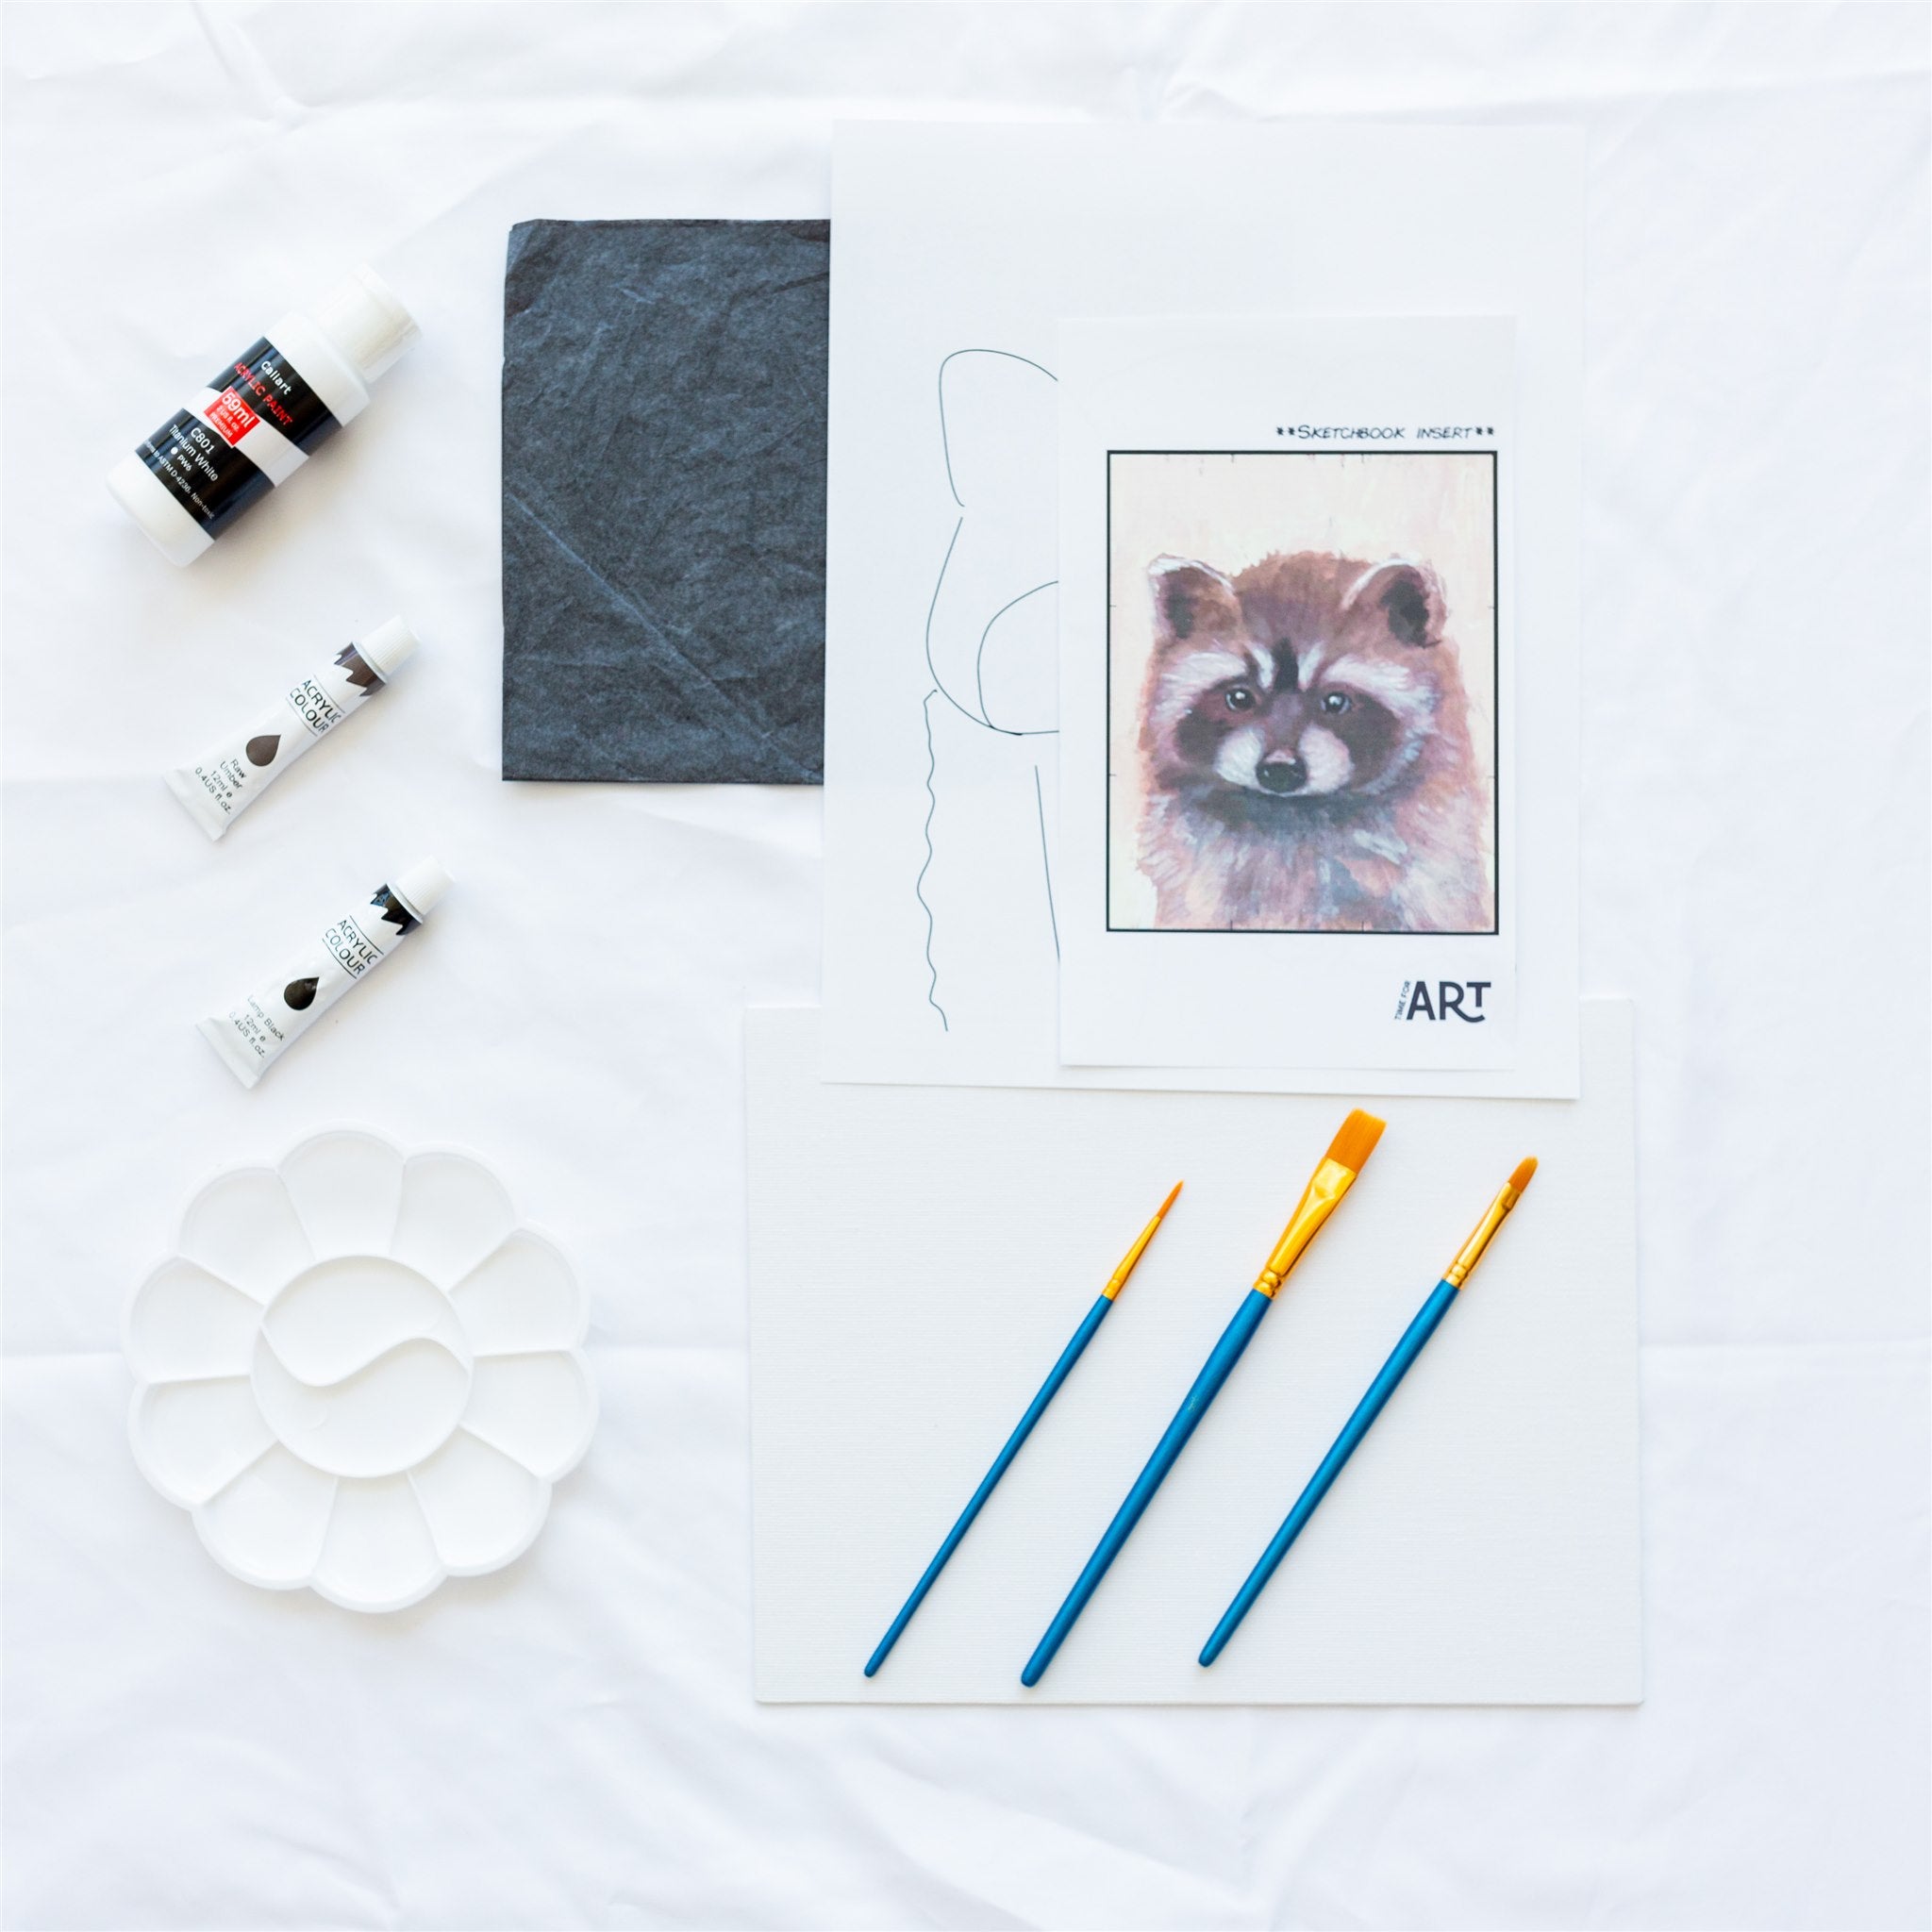 Whats included in the Baby Raccoon painting kit. 4 acrylic paints, painters pallet, brushes, canvas panel, traceable outline, and reference image.